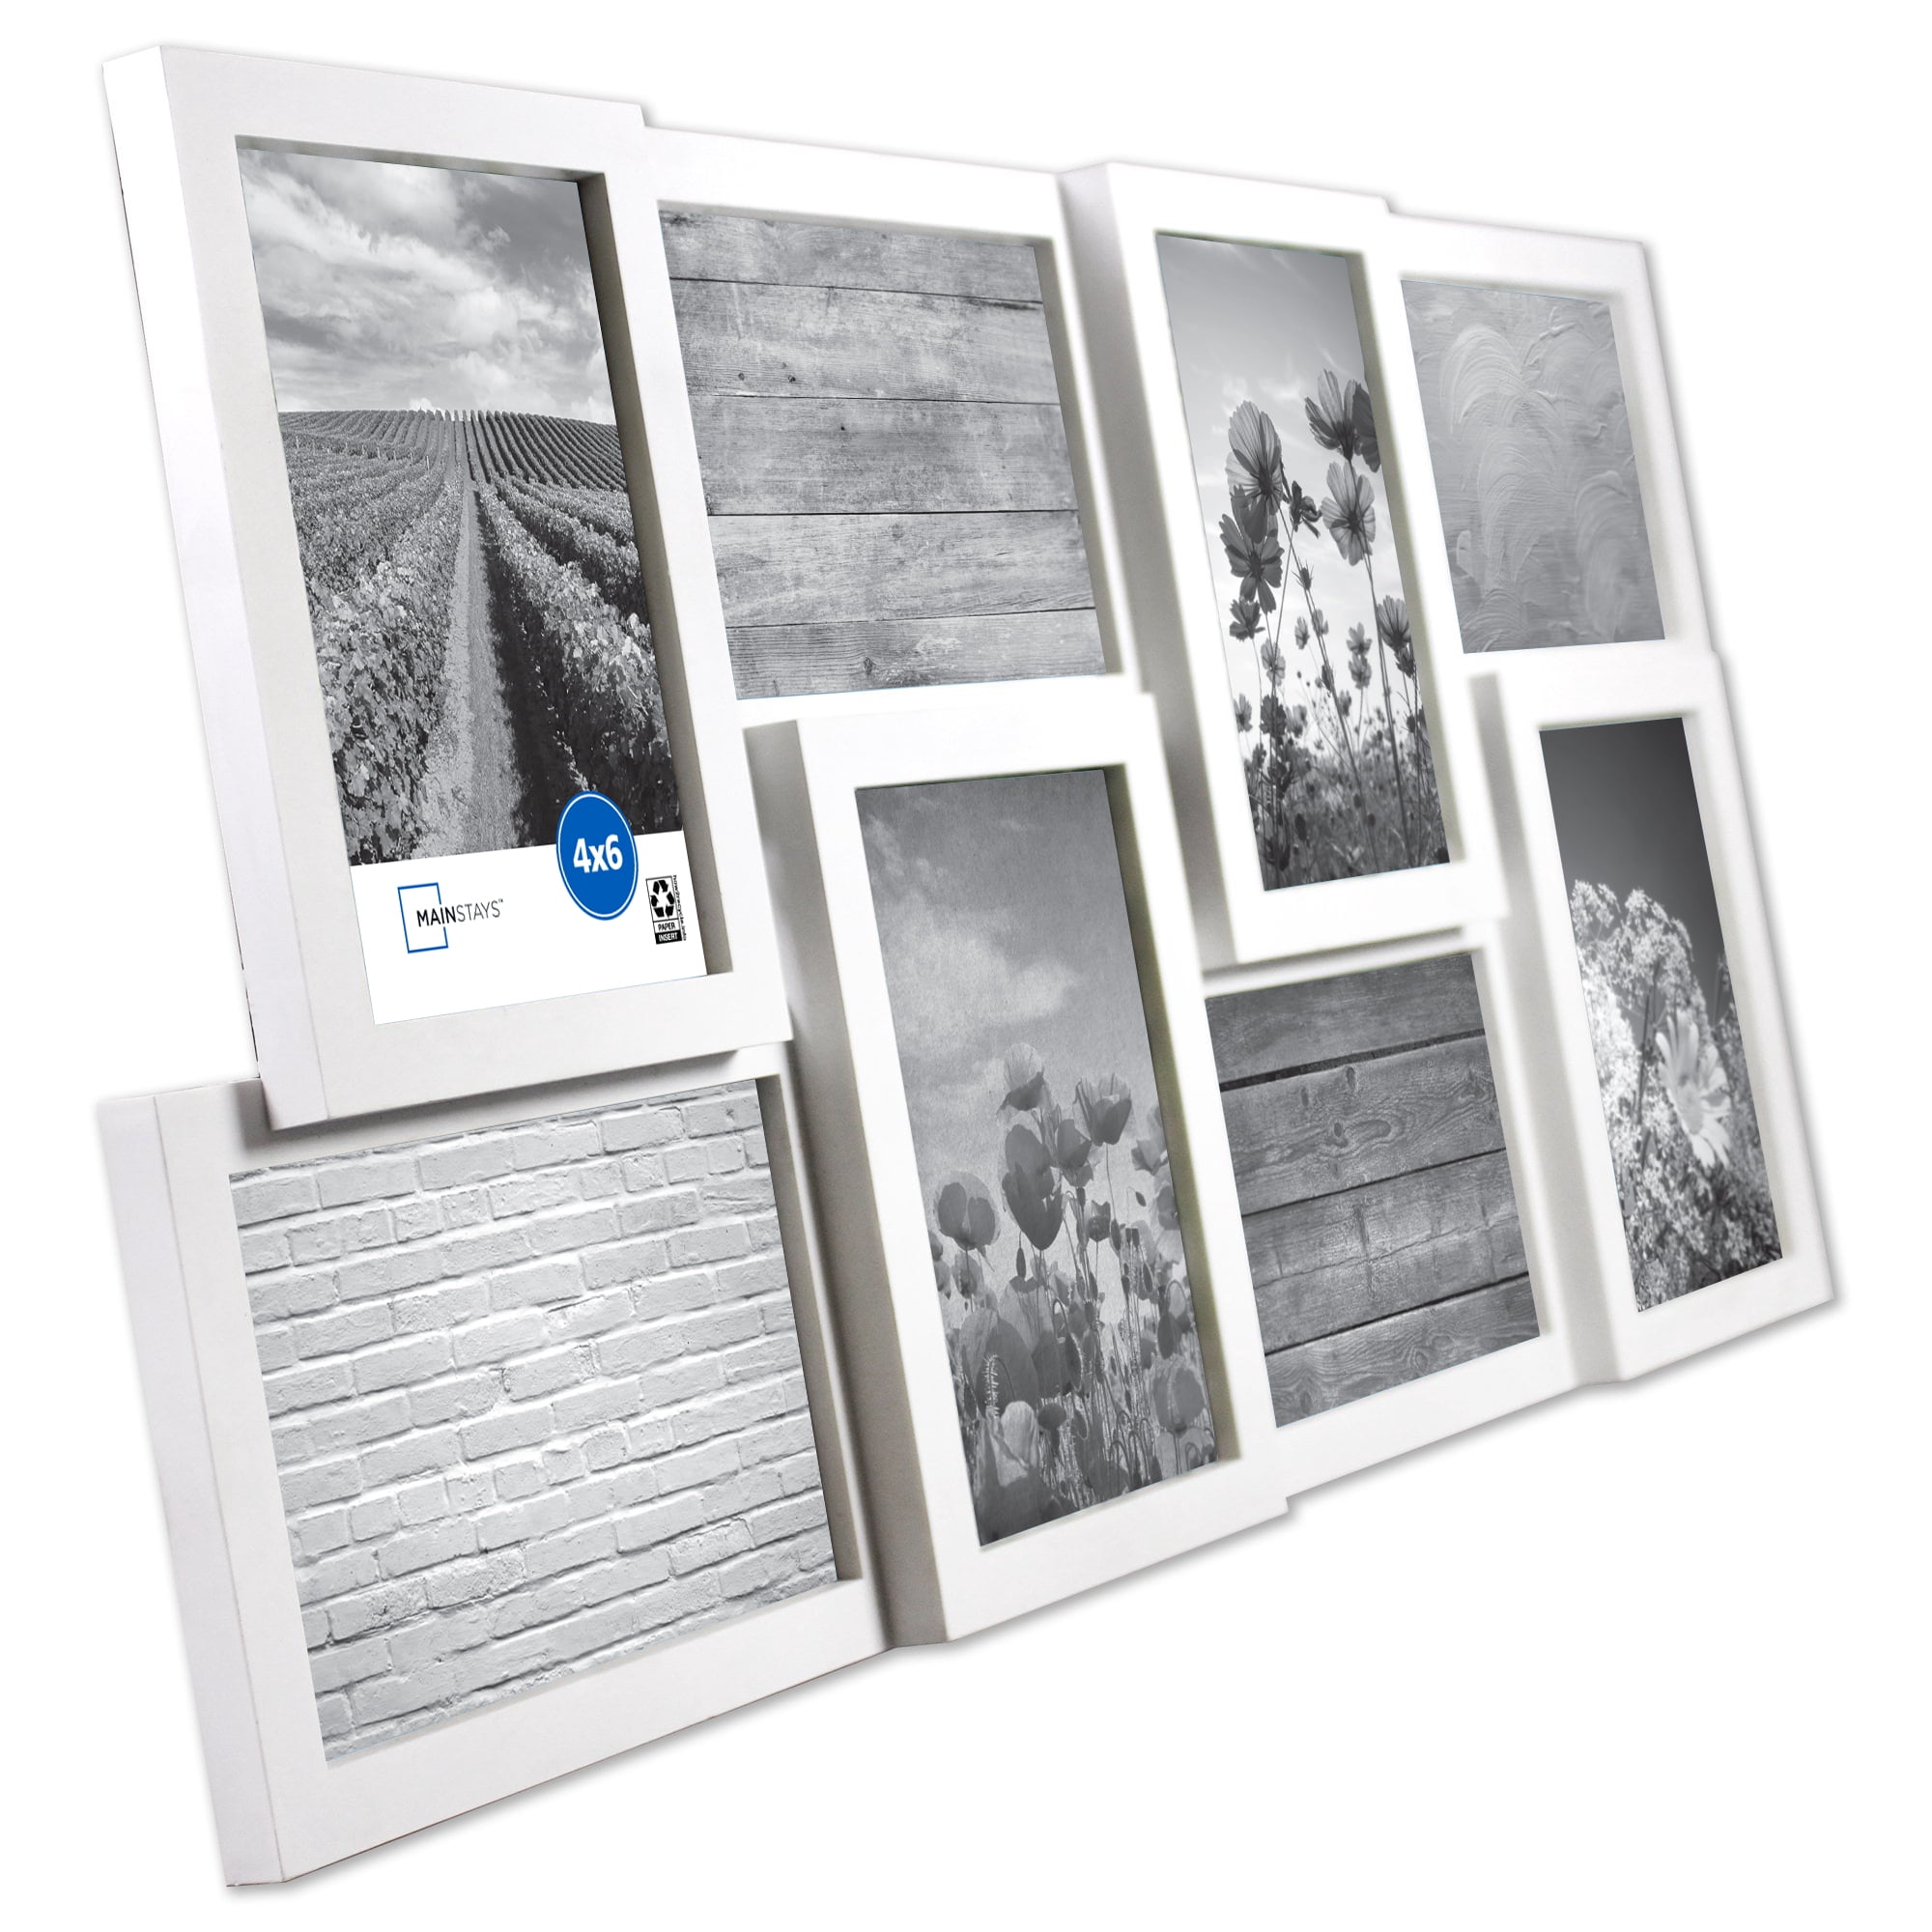 Mainstays 4x6 2-Opening Linear Gallery Wall Picture Frame, White